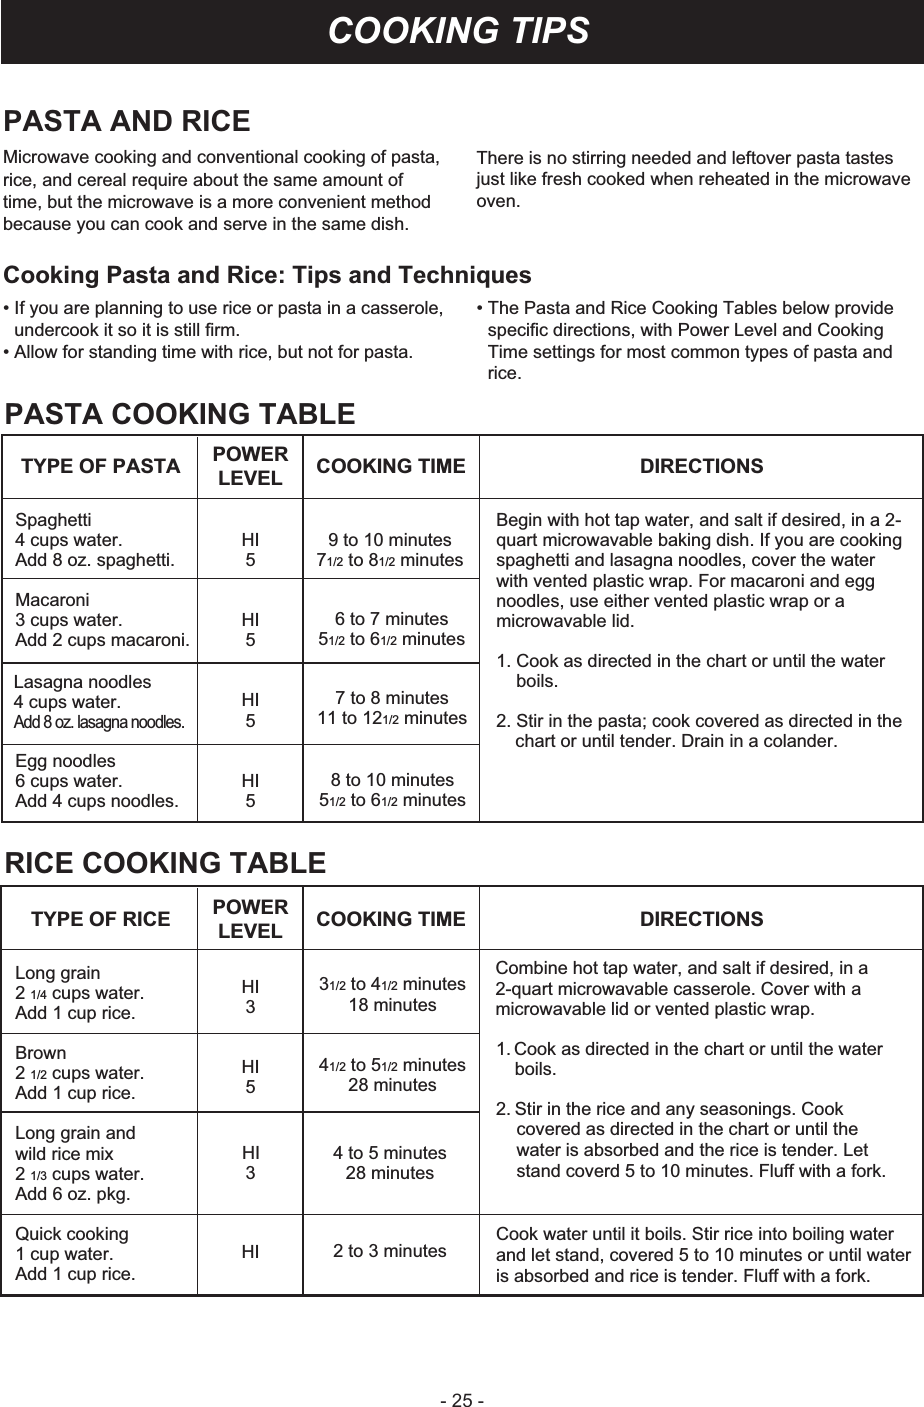 - 25 -COOKING TIPSPASTA AND RICEMicrowave cooking and conventional cooking of pasta, rice, and cereal require about the same amount of time, but the microwave is a more convenient method because you can cook and serve in the same dish.There is no stirring needed and leftover pasta tastesjust like fresh cooked when reheated in the microwaveoven.•If you are planning to use rice or pasta in a casserole,undercook it so it is still firm.•Allow for standing time with rice, but not for pasta.•The Pasta and Rice Cooking Tables below providespecific directions, with Power Level and CookingTime settings for most common types of pasta andrice.Cooking Pasta and Rice: Tips and TechniquesPOWERLEVEL COOKING TIME  DIRECTIONSTYPE OF PASTAHI5HI5HI5HI59 to 10 minutes71/2 to 81/2 minutes6 to 7 minutes51/2 to 61/2 minutes7 to 8 minutes11 to 121/2 minutes8 to 10 minutes51/2 to 61/2 minutesBegin with hot tap water, and salt if desired, in a 2-quart microwavable baking dish. If you are cooking spaghetti and lasagna noodles, cover the water with vented plastic wrap. For macaroni and egg noodles, use either vented plastic wrap or a microwavable lid.1. Cook as directed in the chart or until the waterboils. 2. Stir in the pasta; cook covered as directed in thechart or until tender. Drain in a colander.Spaghetti4 cups water.Add 8 oz. spaghetti.Macaroni3 cups water.Add 2 cups macaroni.Lasagna noodles4 cups water.Add 8 oz. lasagna noodles.Egg noodles6 cups water.Add 4 cups noodles.PASTA COOKING TABLEPOWERLEVEL COOKING TIME  DIRECTIONSTYPE OF RICEHI3HI5HI3HI31/2 to 41/2 minutes18 minutes41/2 to 51/2 minutes28 minutes4 to 5 minutes28 minutes2 to 3 minutesCombine hot tap water, and salt if desired, in a 2-quart microwavable casserole. Cover with a microwavable lid or vented plastic wrap.1. Cook as directed in the chart or until the waterboils.2. Stir in the rice and any seasonings. Cookcovered as directed in the chart or until thewater is absorbed and the rice is tender. Letstand coverd 5 to 10 minutes. Fluff with a fork.Cook water until it boils. Stir rice into boiling water and let stand, covered 5 to 10 minutes or until wateris absorbed and rice is tender. Fluff with a fork. Long grain2 1/4 cups water.Add 1 cup rice.Brown2 1/2 cups water.Add 1 cup rice.Long grain andwild rice mix2 1/3 cups water.Add 6 oz. pkg.Quick cooking1 cup water.Add 1 cup rice.RICE COOKING TABLE